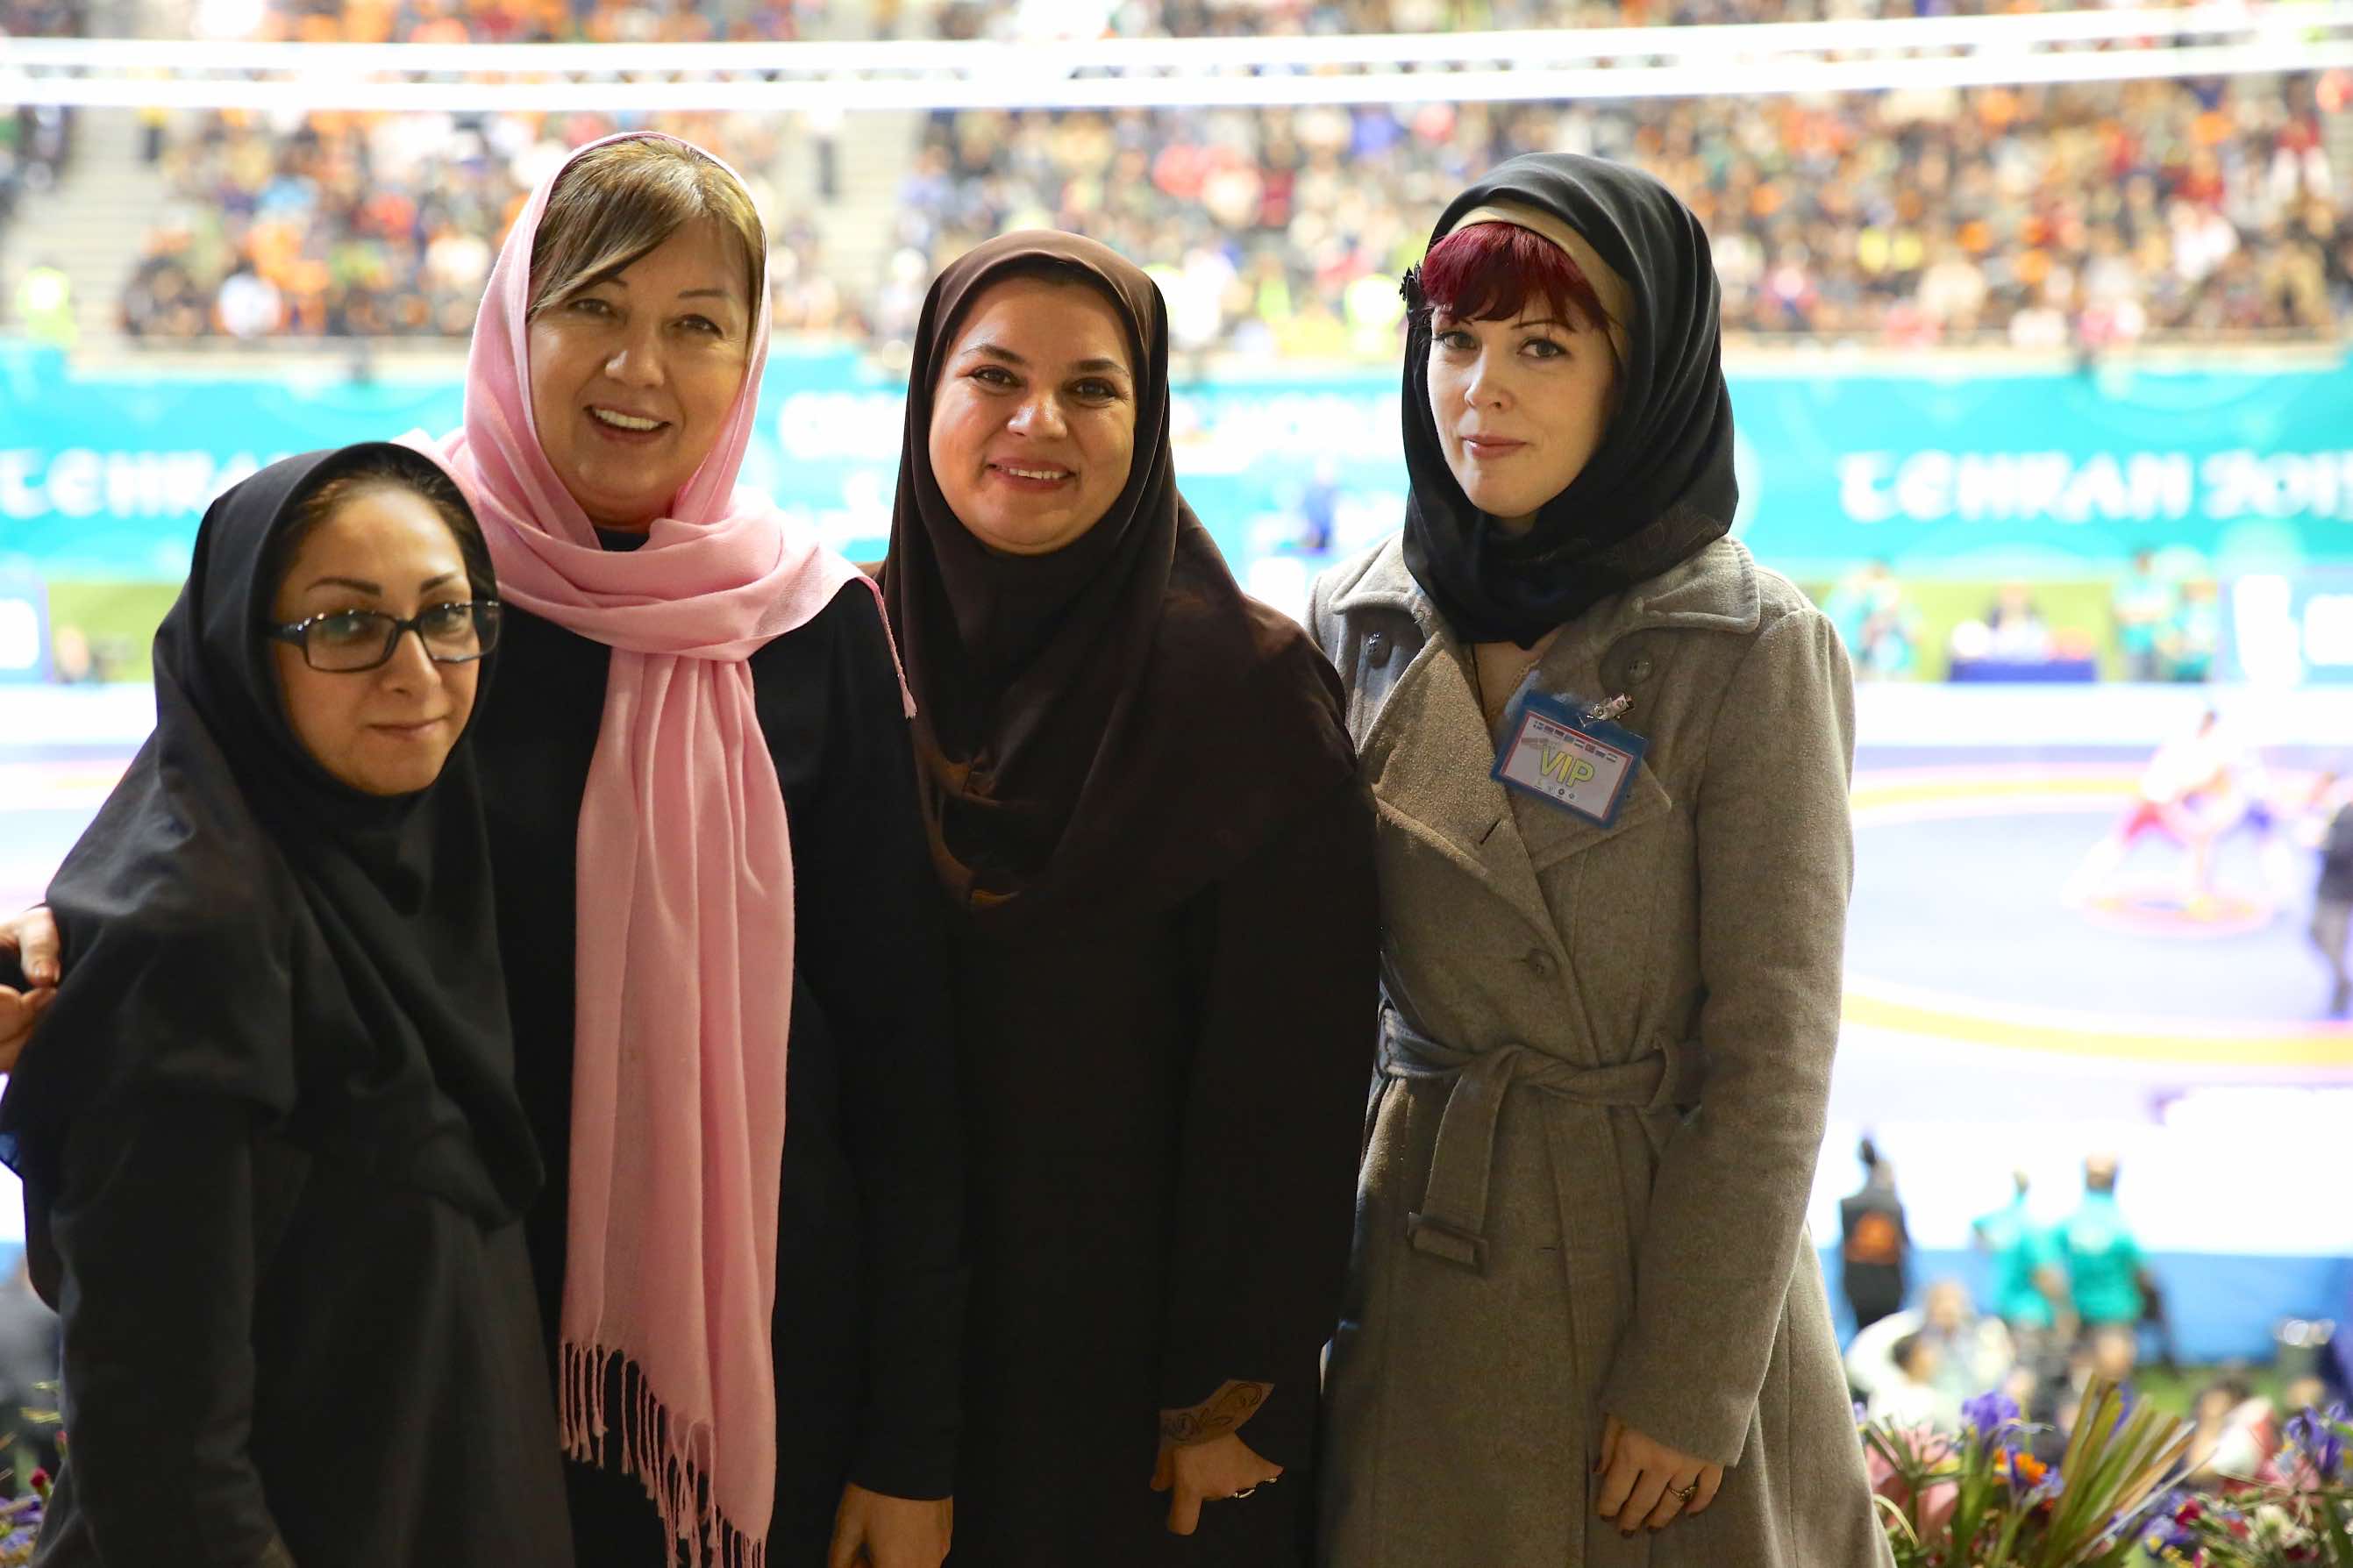 Iranian Wrestling Federation international department head Farnaz Panahi and United World Wrestling Bureau member Rodica Yaksi attended the Greco-Roman World Cup in Tehran with Badrolmolouk Kahrangi and a fellow dignitary ©Tim Foley/United World Wrestling